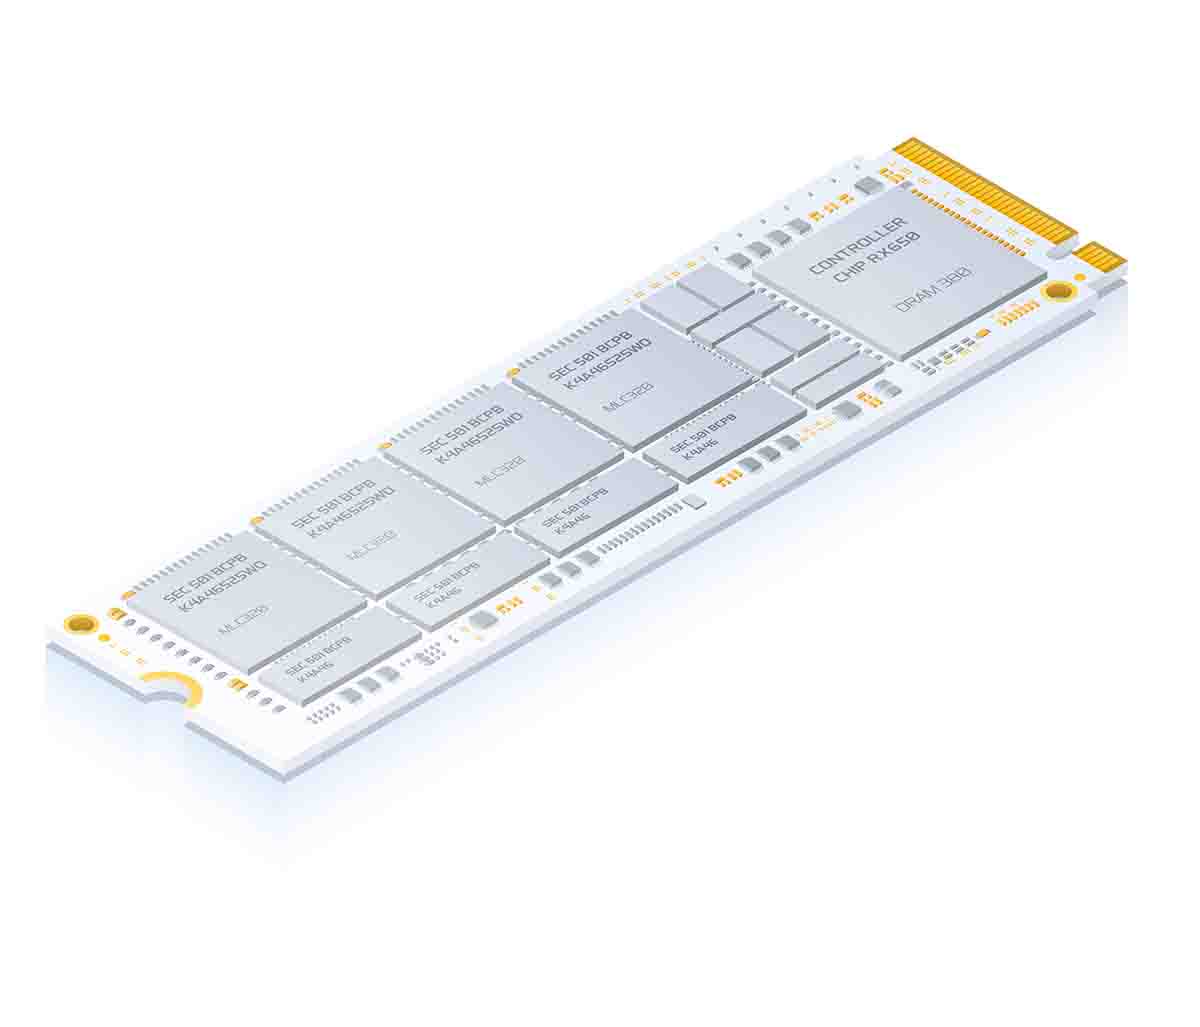 An isometric graphic of a RAM stick, detailed with individual memory chips and golden connectors.